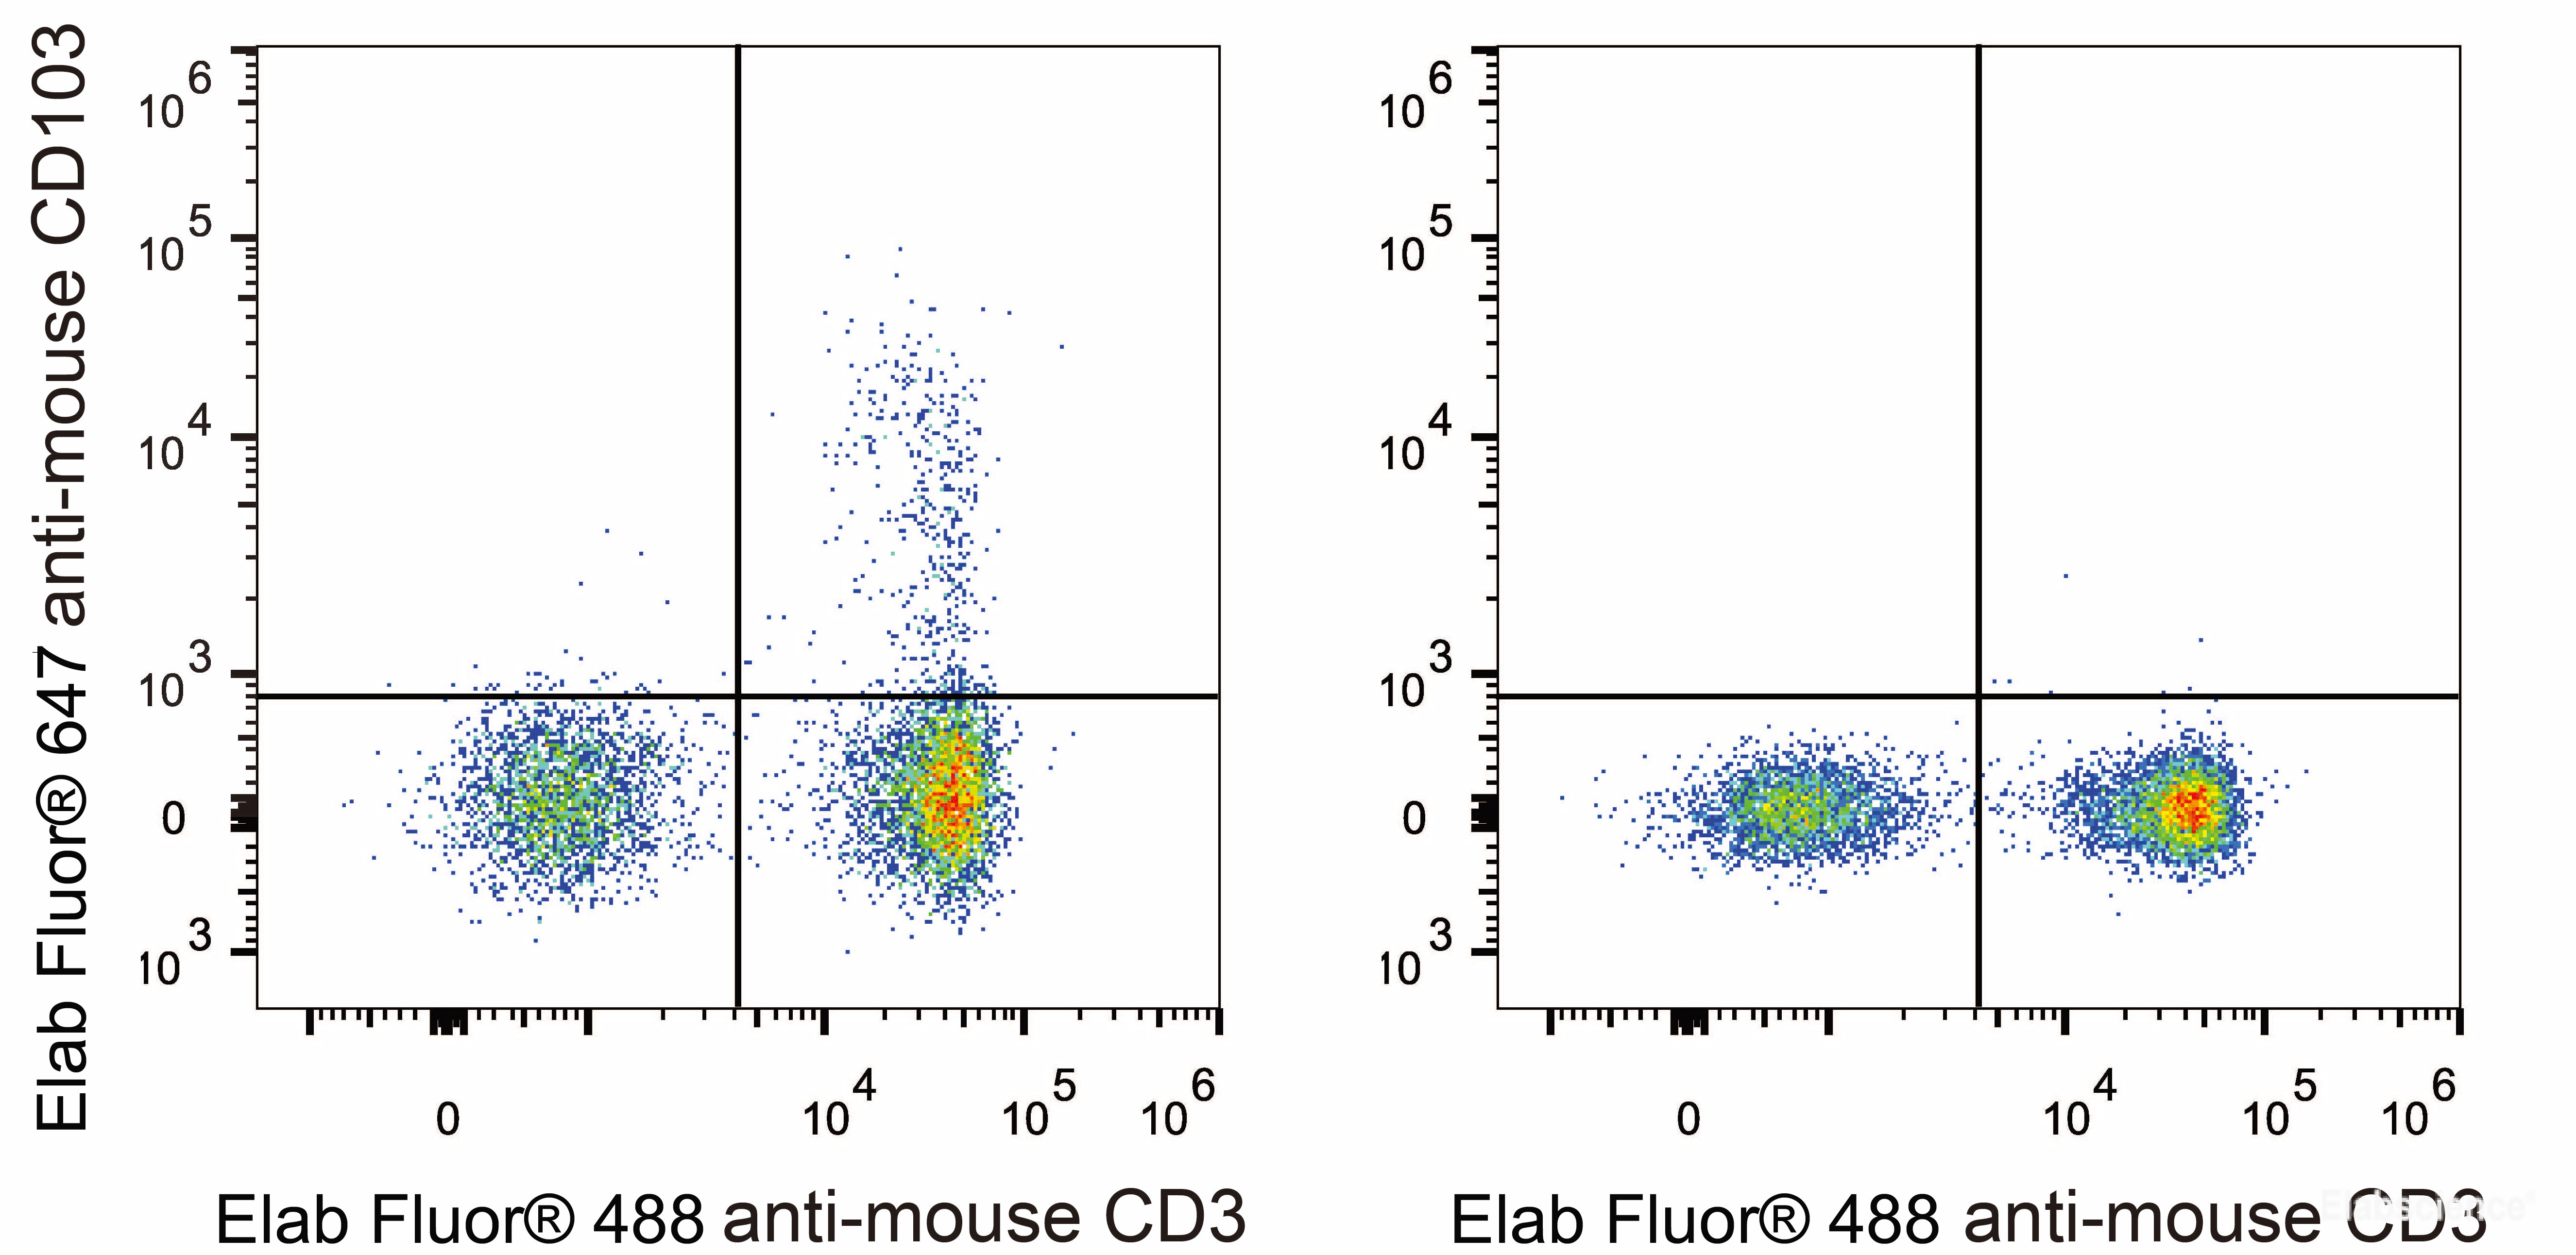 C57BL/6 murine splenocytes are stained with Elab Fluor<sup>®</sup> 647 Anti-Mouse CD103 Antibody and Elab Fluor<sup>®</sup> 488 Anti-Mouse CD3 Antibody (Left). Splenocytes stained with Elab Fluor<sup>®</sup> 488 Anti-Mouse CD3 Antibody (Right) are used as control.